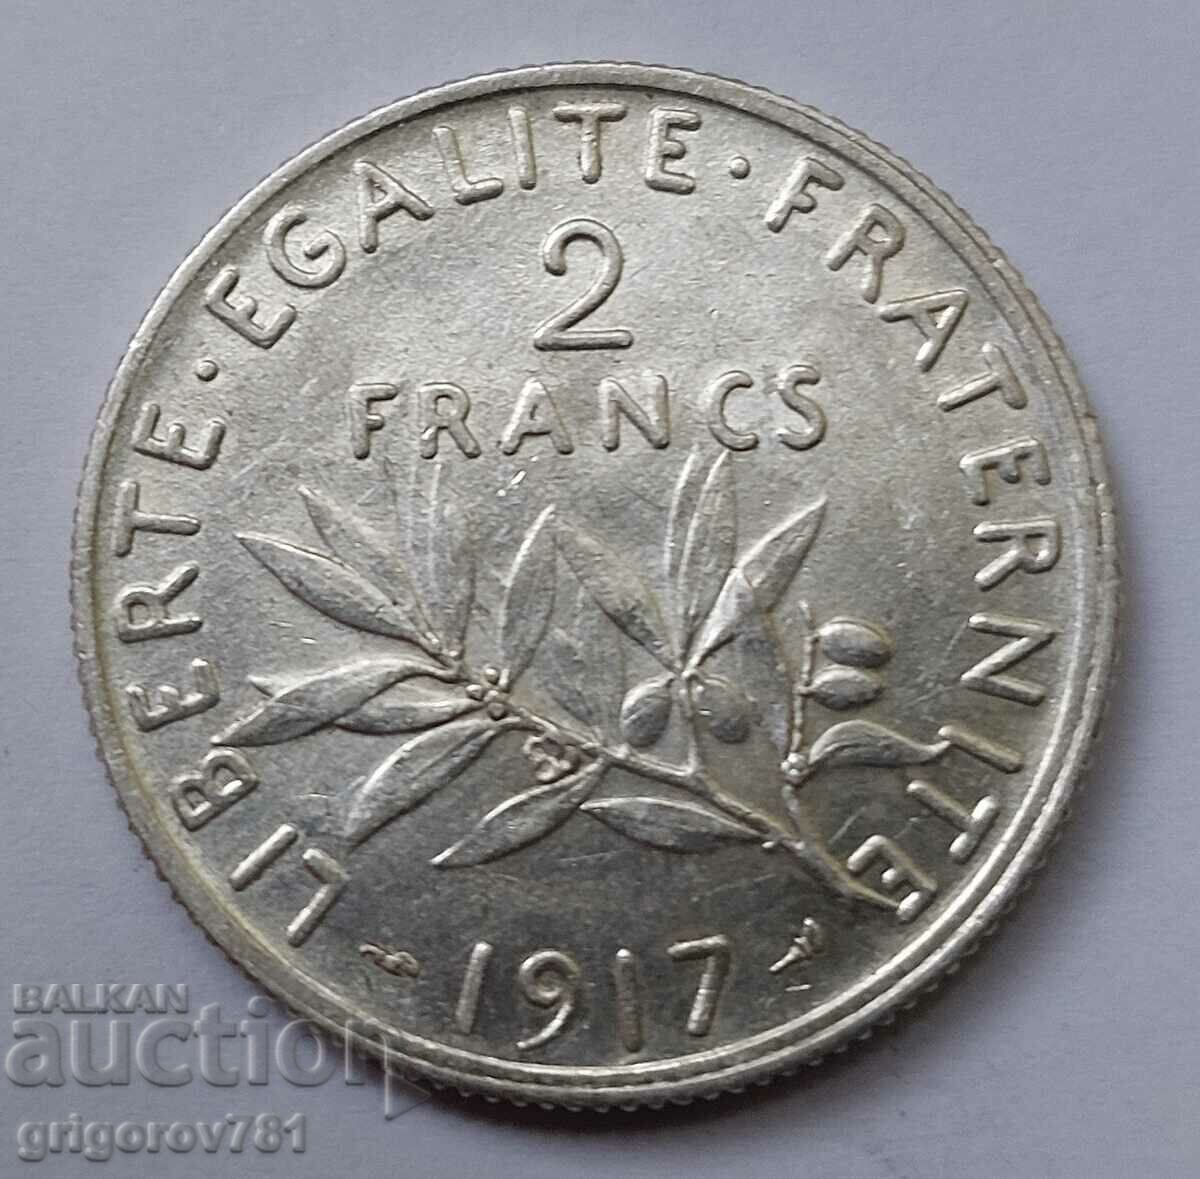 2 Francs Silver France 1917 - Silver Coin #48